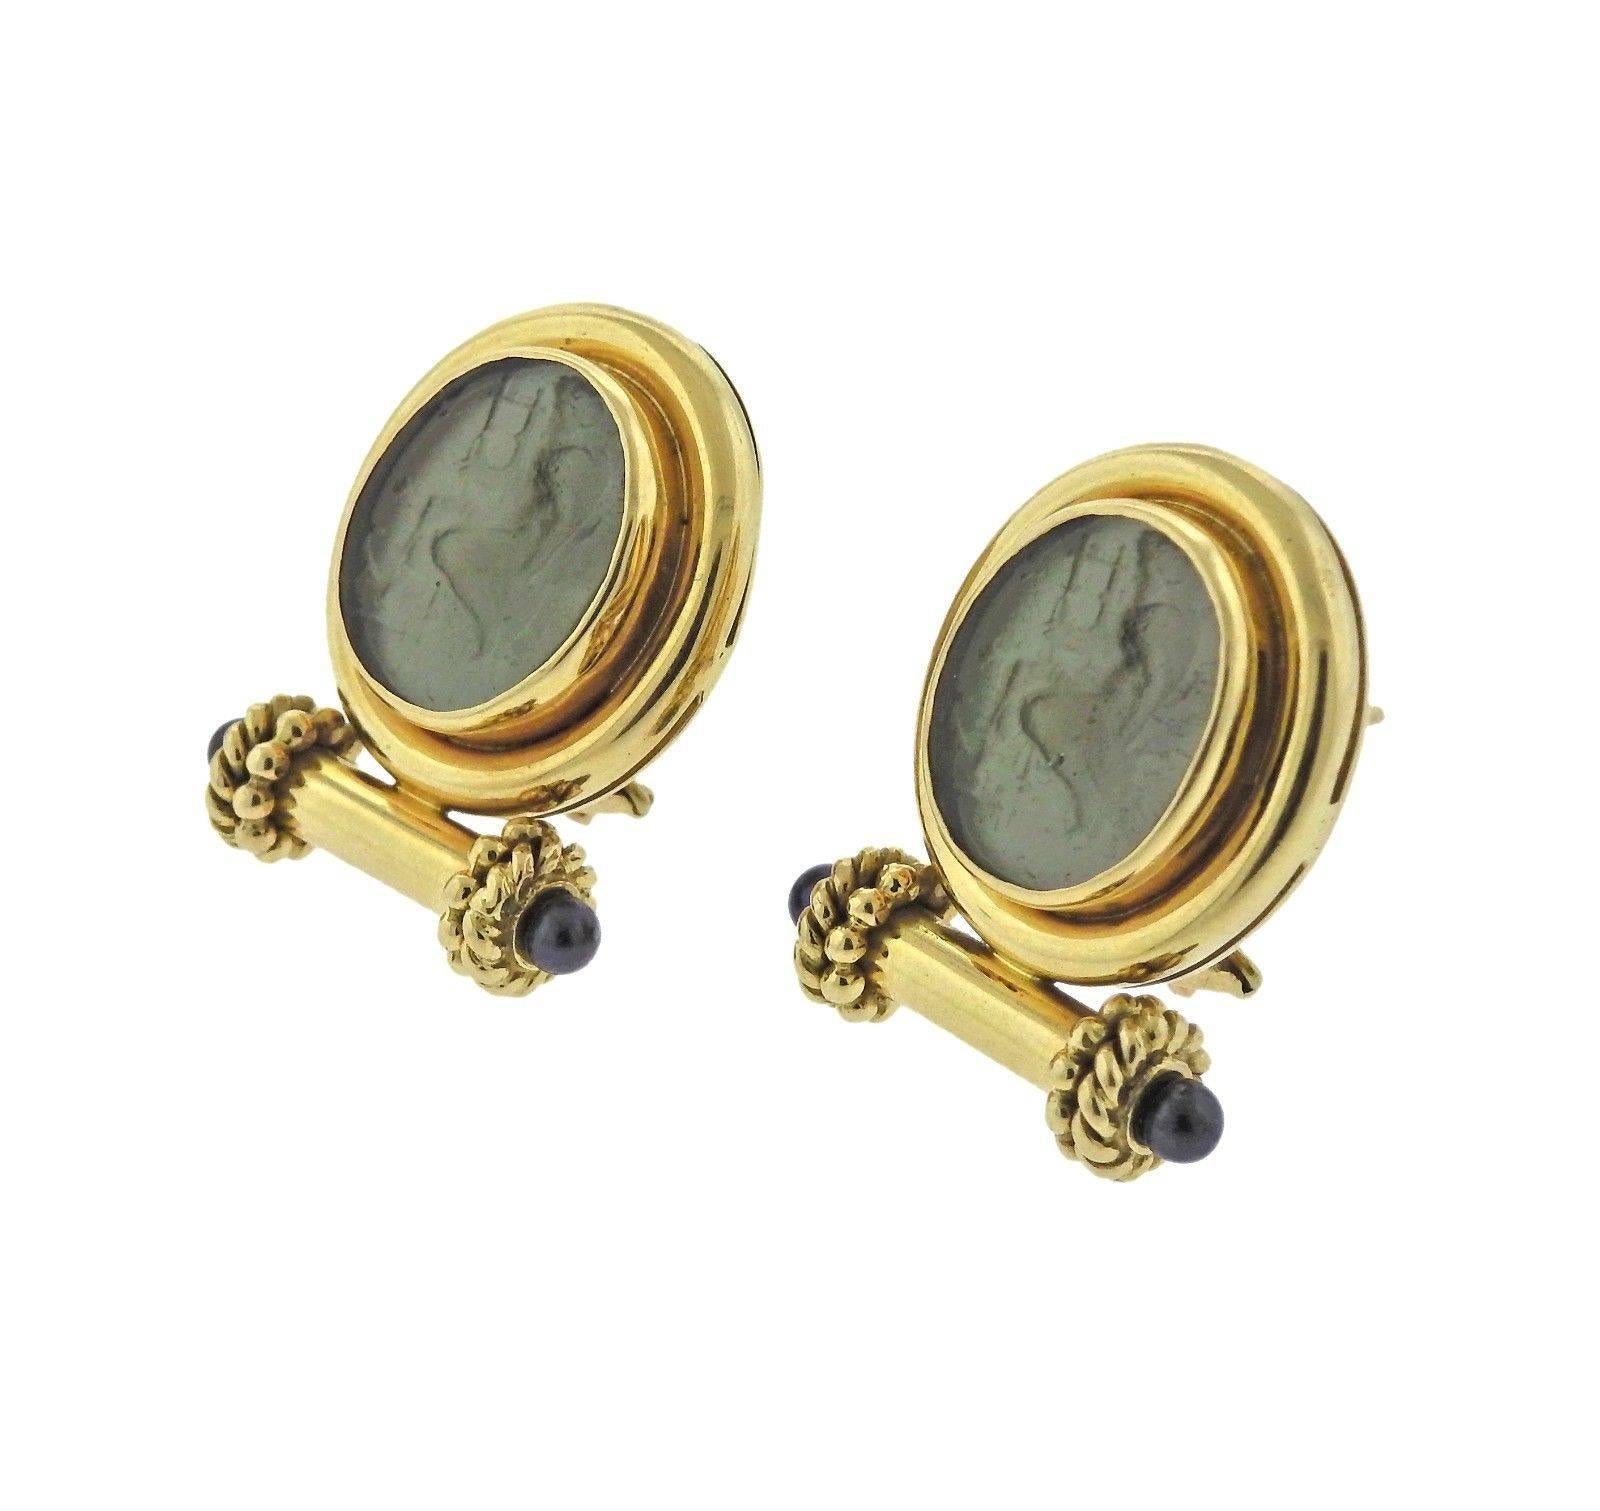 A pair of 18k yellow gold earrings set with Venetian glass intaglio and 3.2mm pearls.  The earrings measure 28mm x 22mm and weigh 11.1 grams.  Marked: Maker's Mark, 18k.